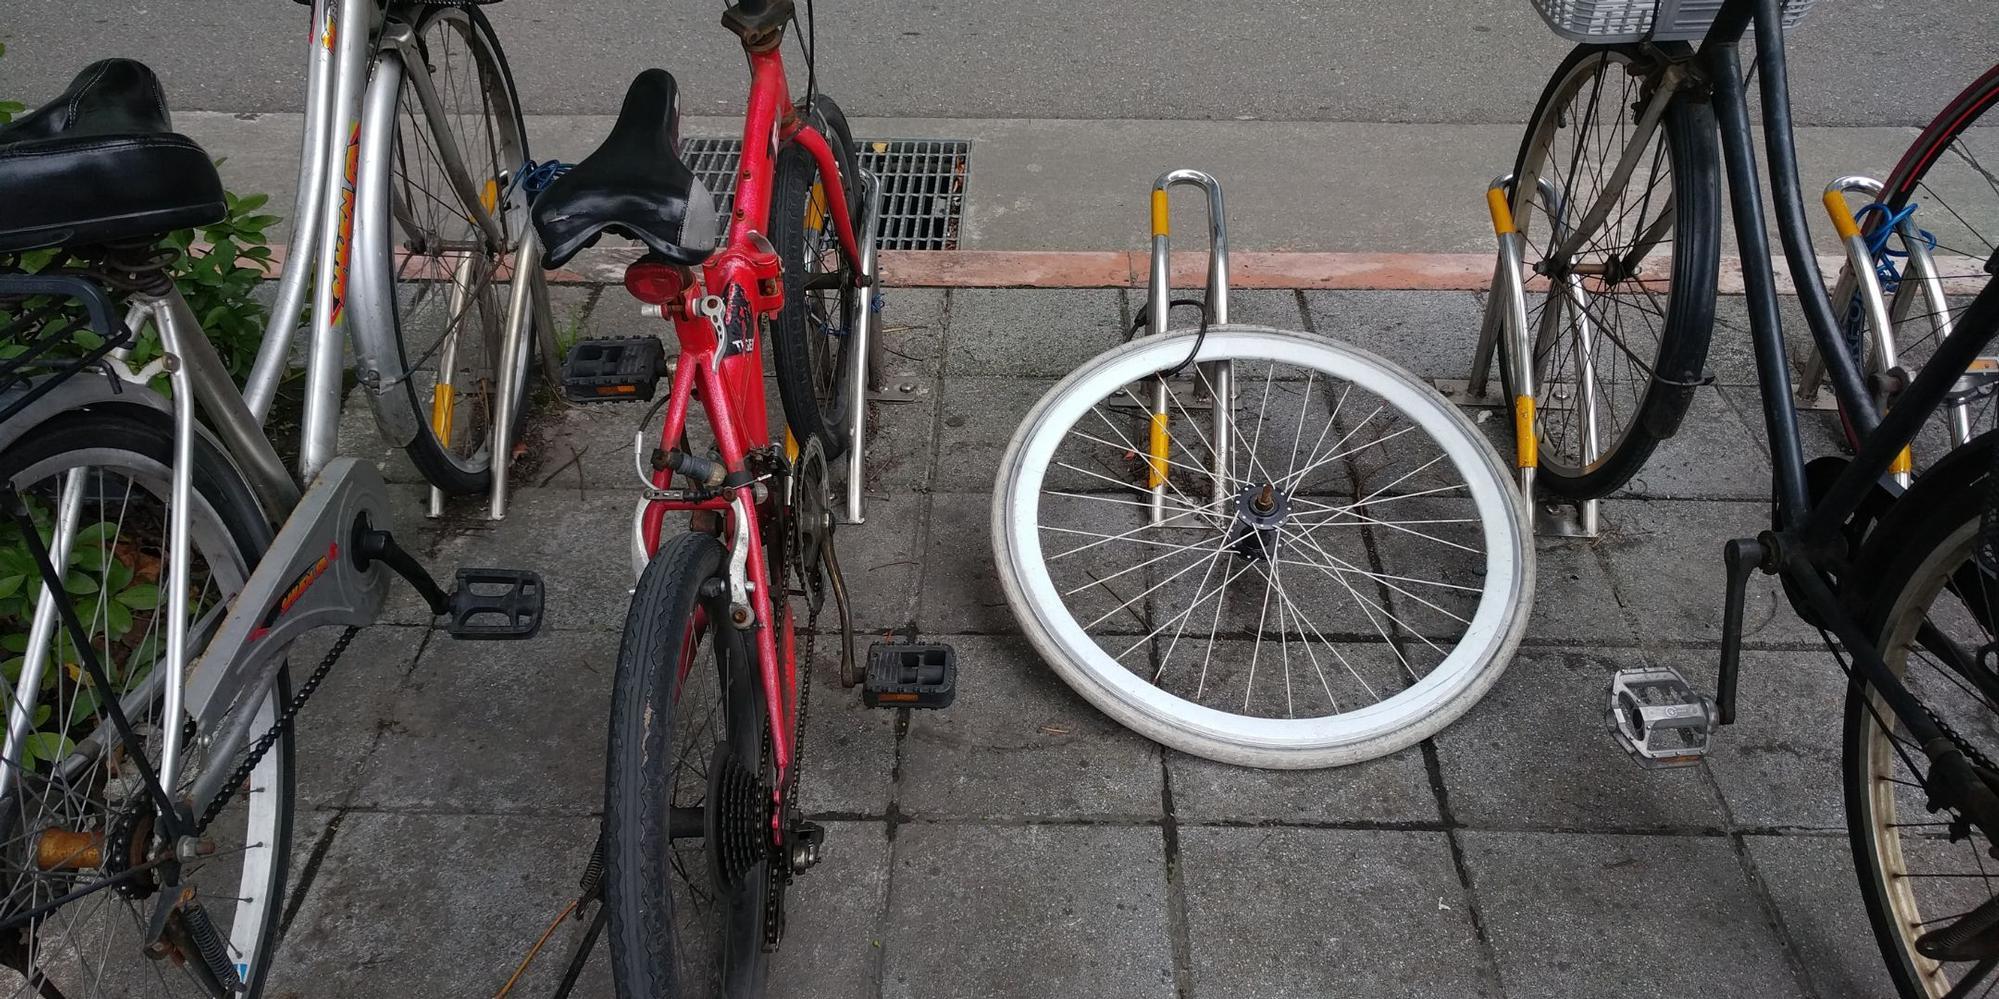 Is your bike safe? Tips and guidance to ensure your bike's security